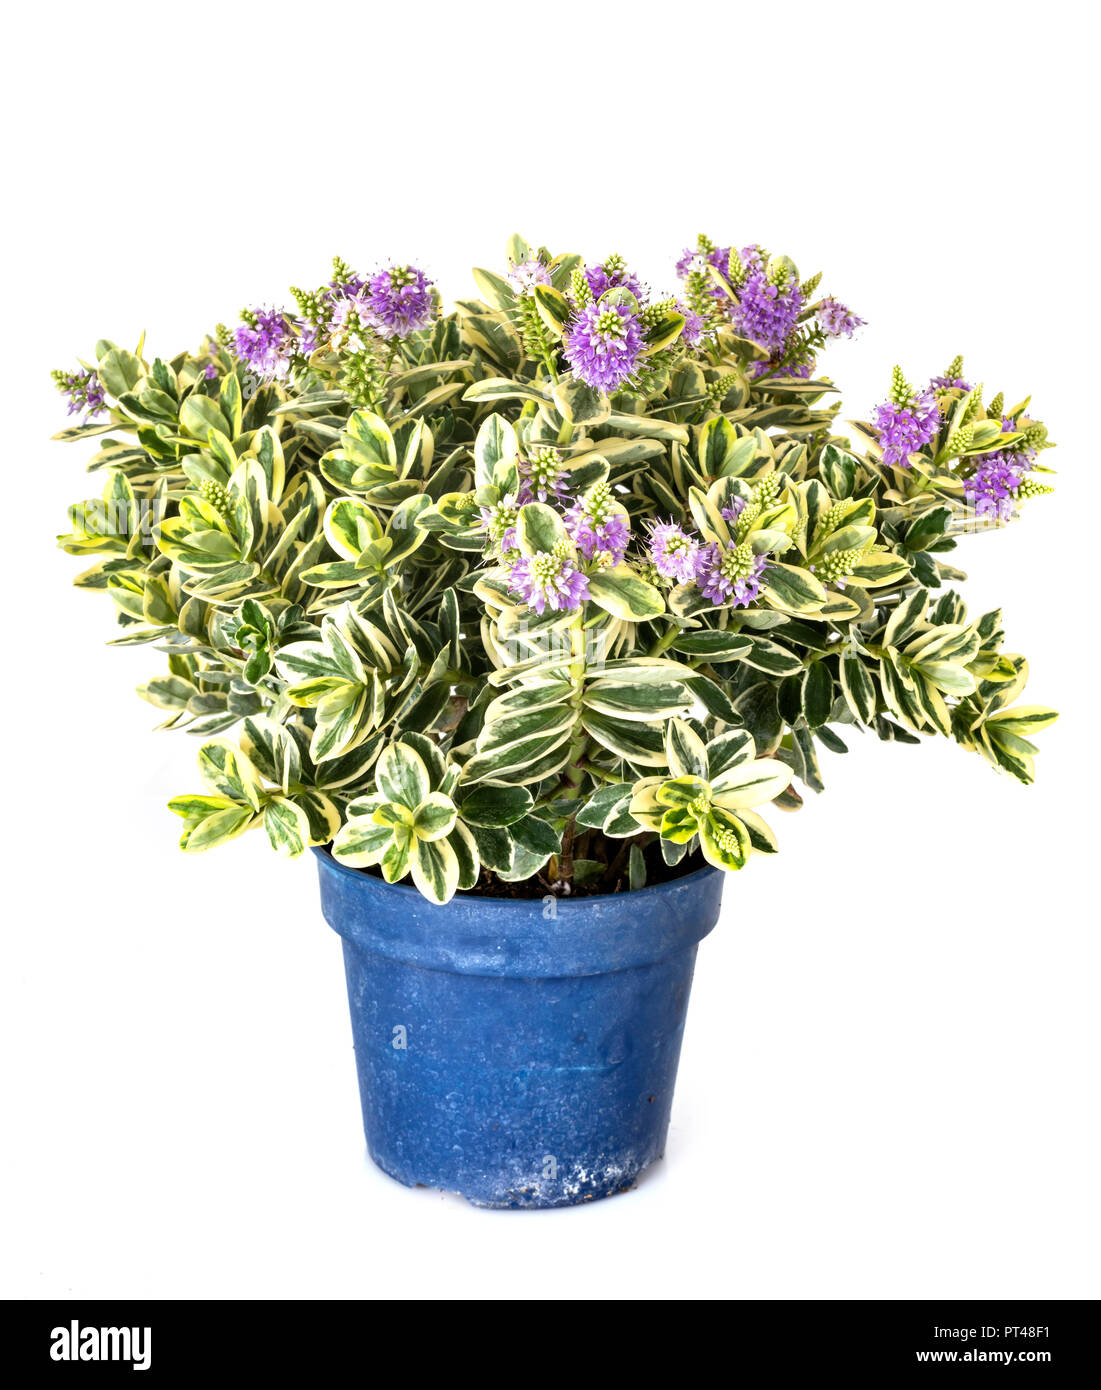 hebe plant in front of white background Stock Photo